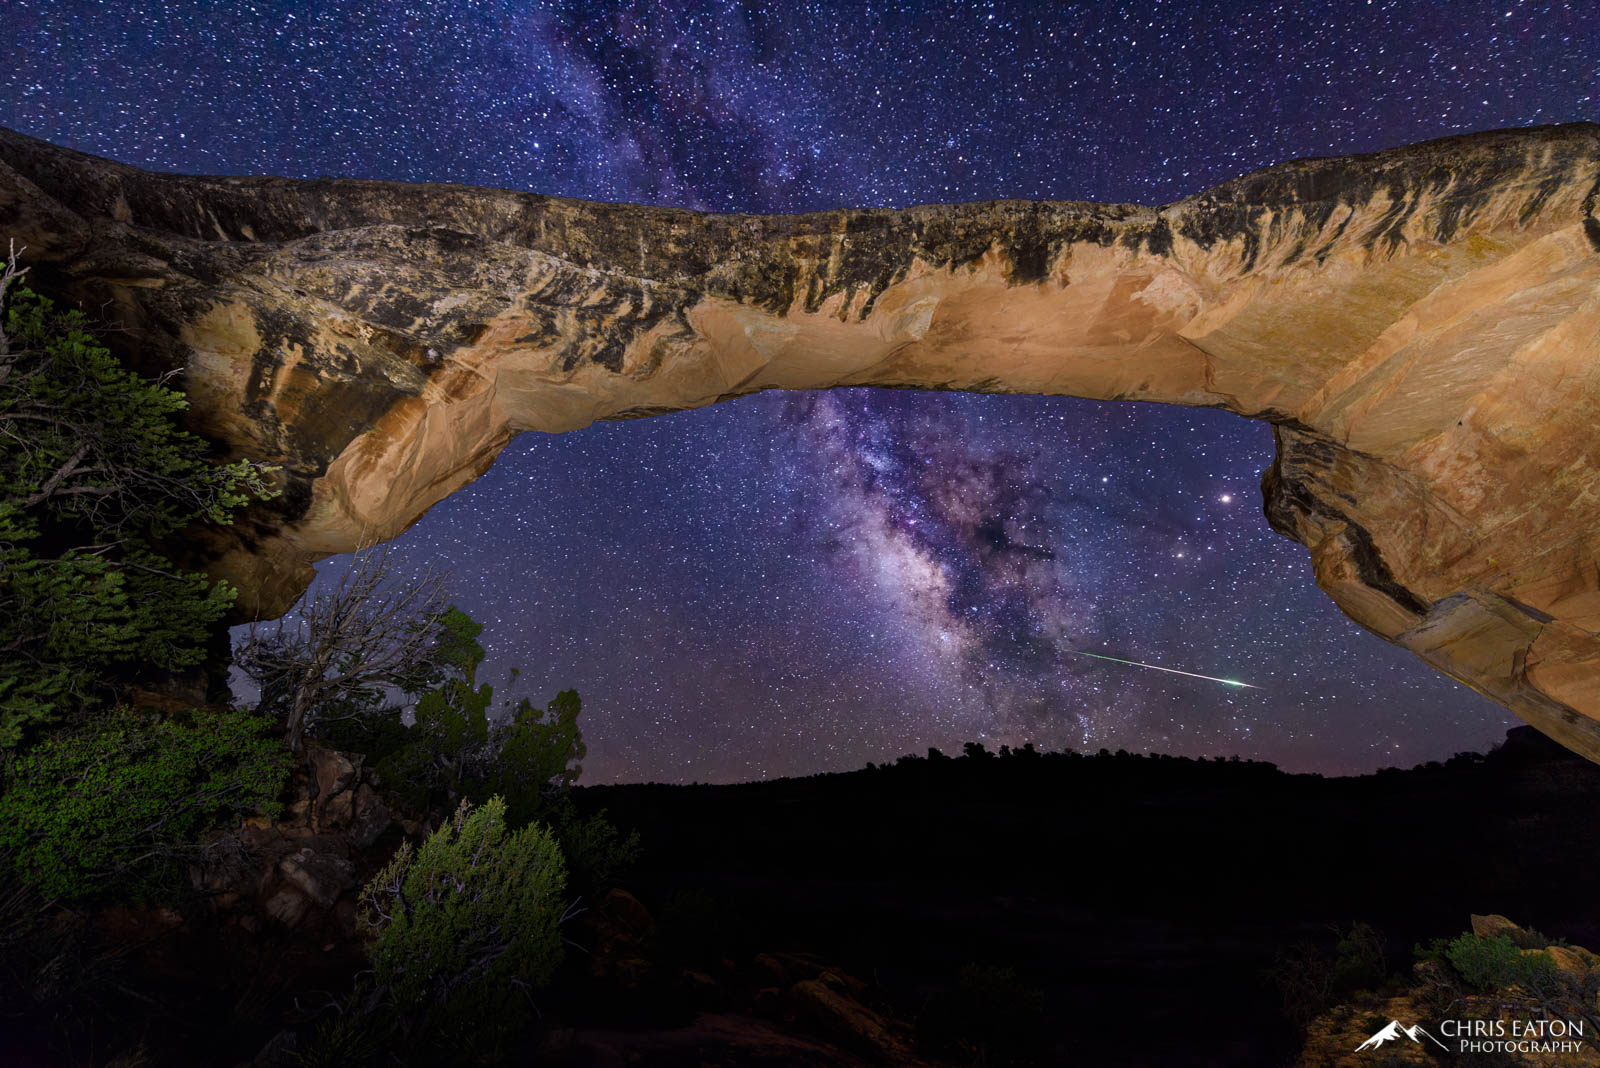 An Eta Aquarid meteor in front of the Milky Way as it is torn apart by the Earth’s atmosphere. Owachomo Bridge, in Natural Bridges National Monument.